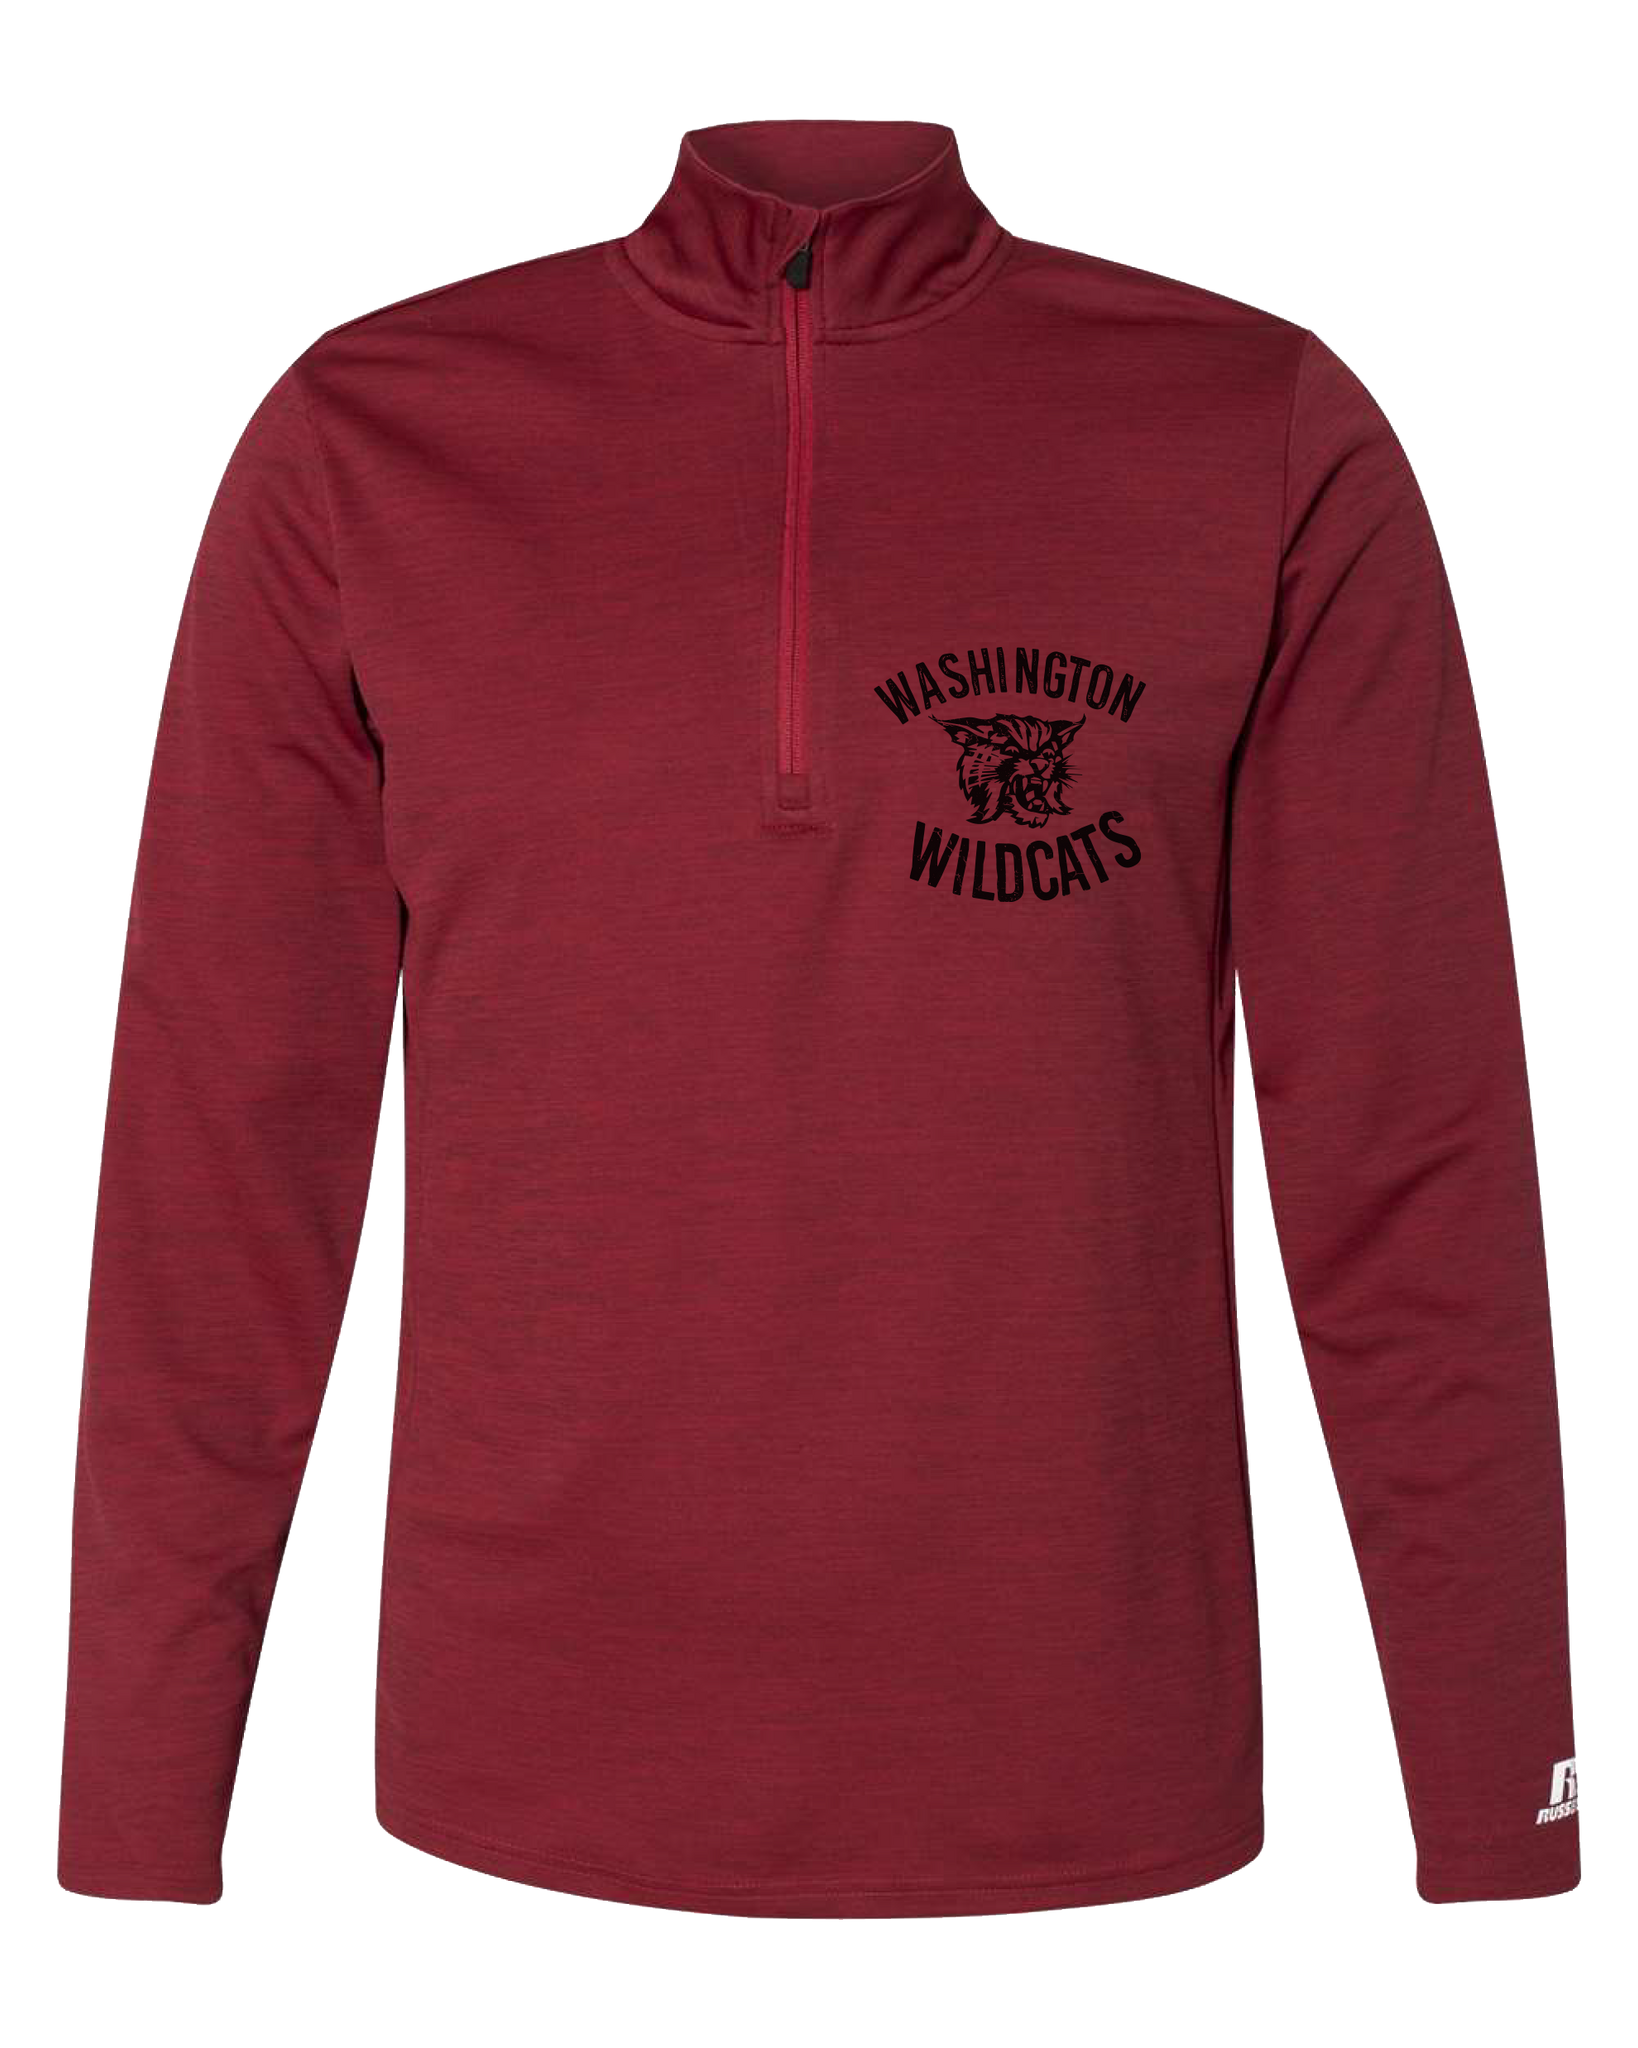 Russell Athletic Washington Wildcats Striated Quarter Zip Pullover